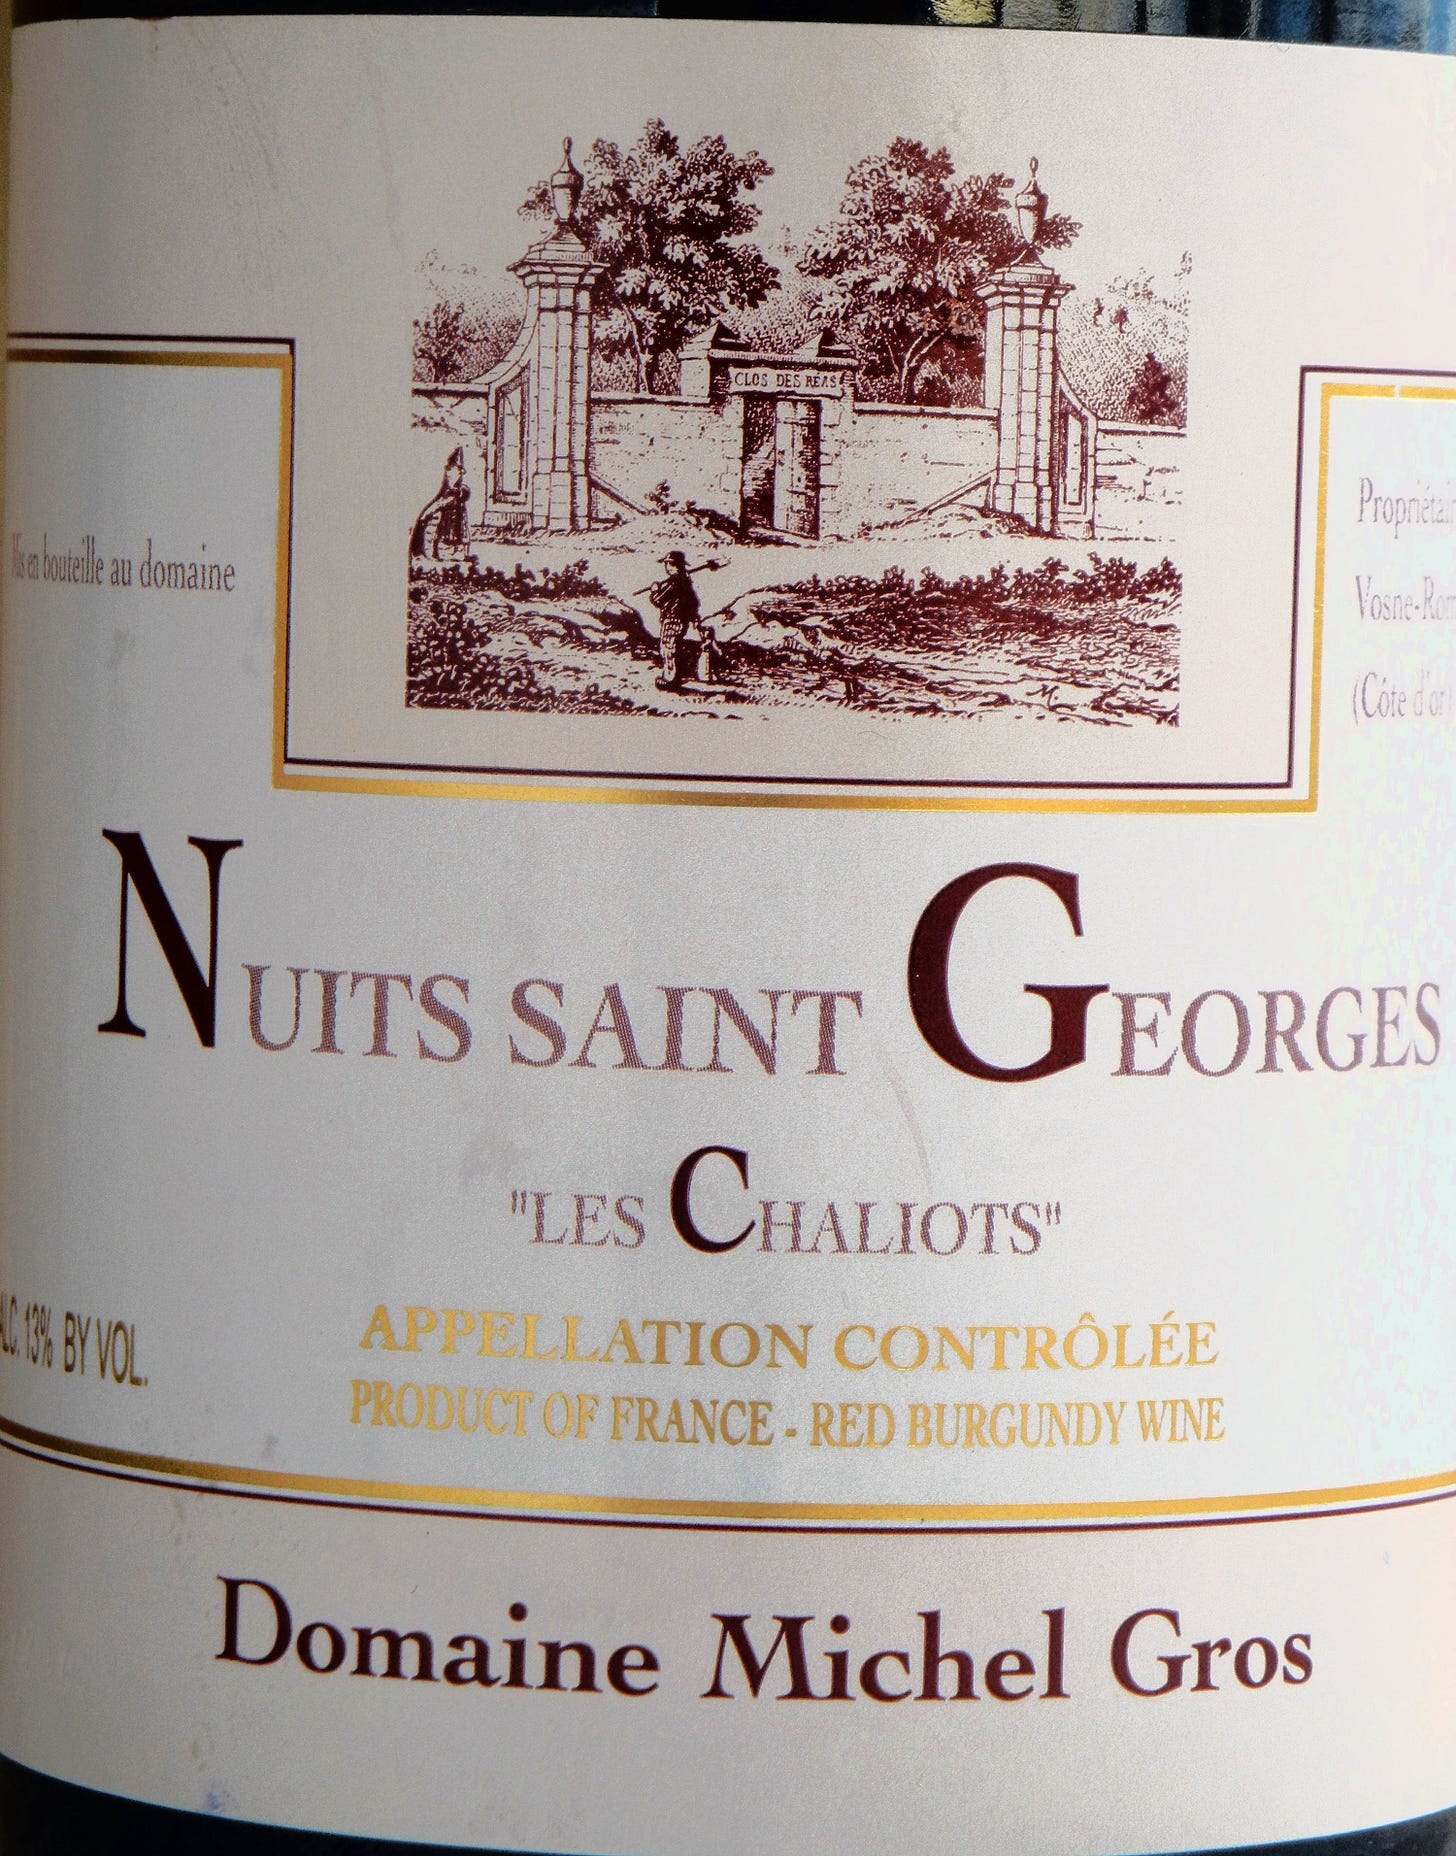 Nuits St. George Chaliots Michel Gros 2008 Label - BC Pinot Noir Tasting Review 16